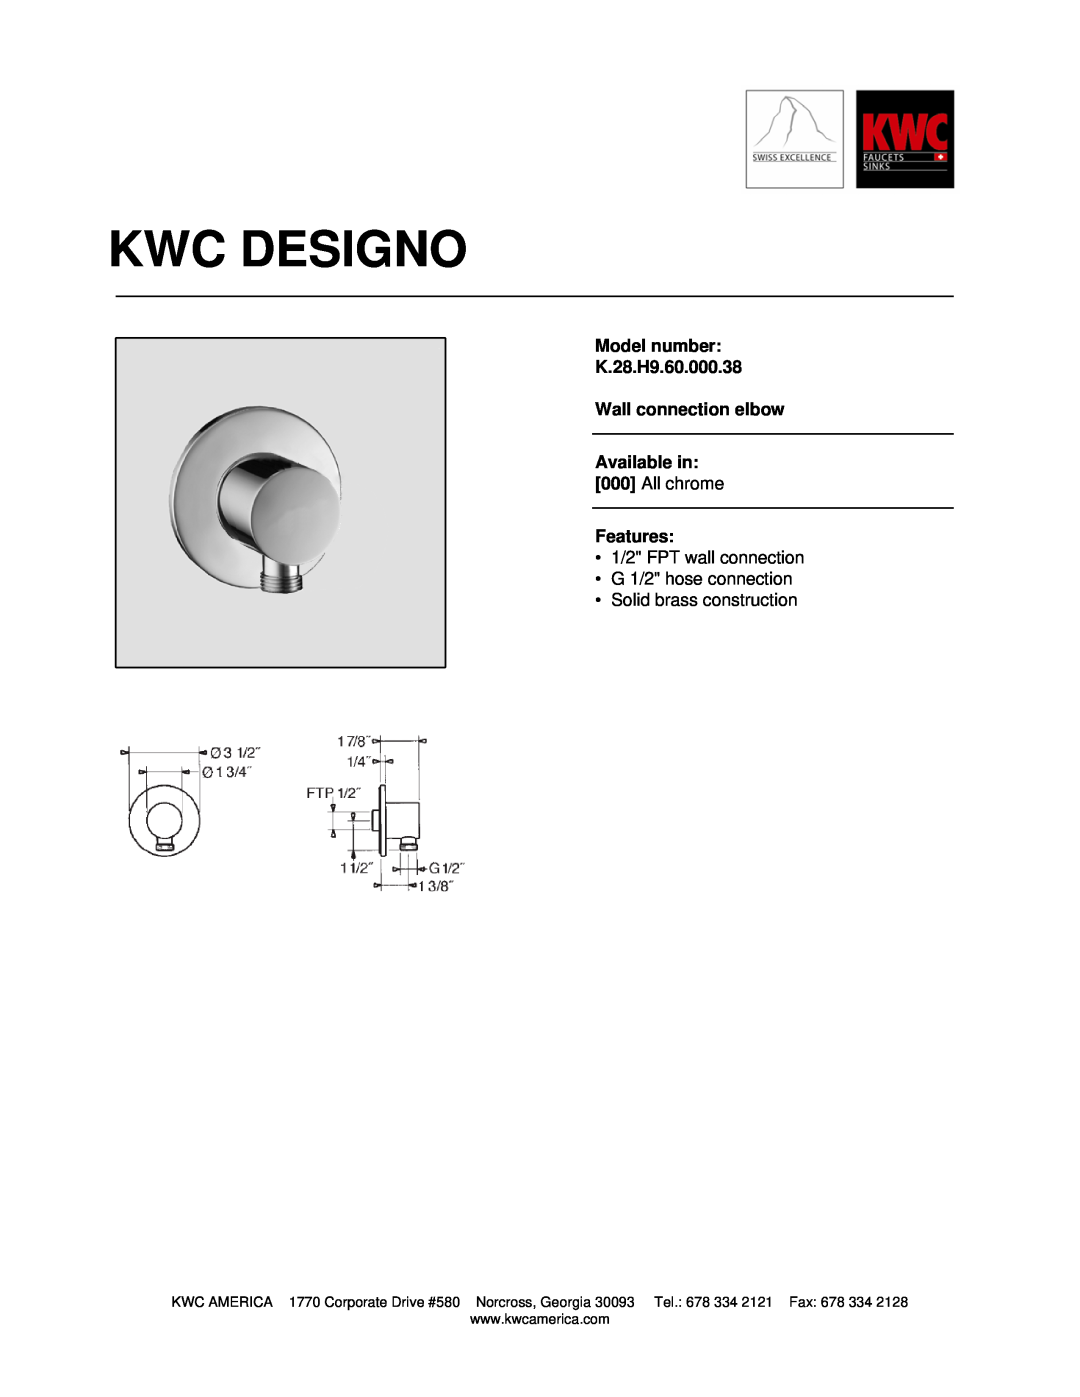 KWC manual Kwc Designo, Model number K.28.H9.60.000.38, Wall connection elbow, Available in 000 All chrome Features 